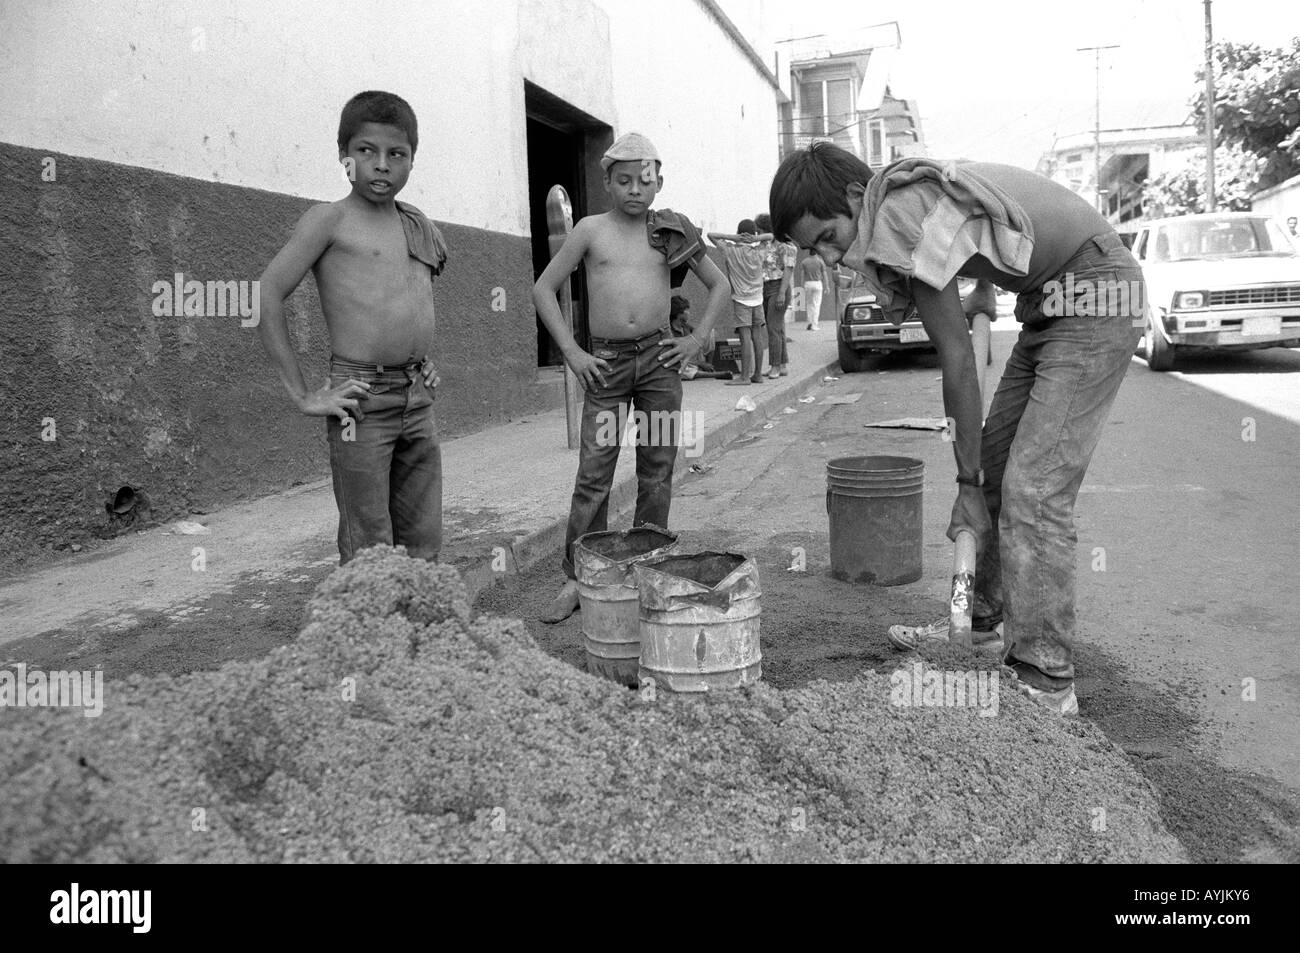 b/w of child labor showing young boys working on a building site. San Pedro Sula, Honduras Stock Photo